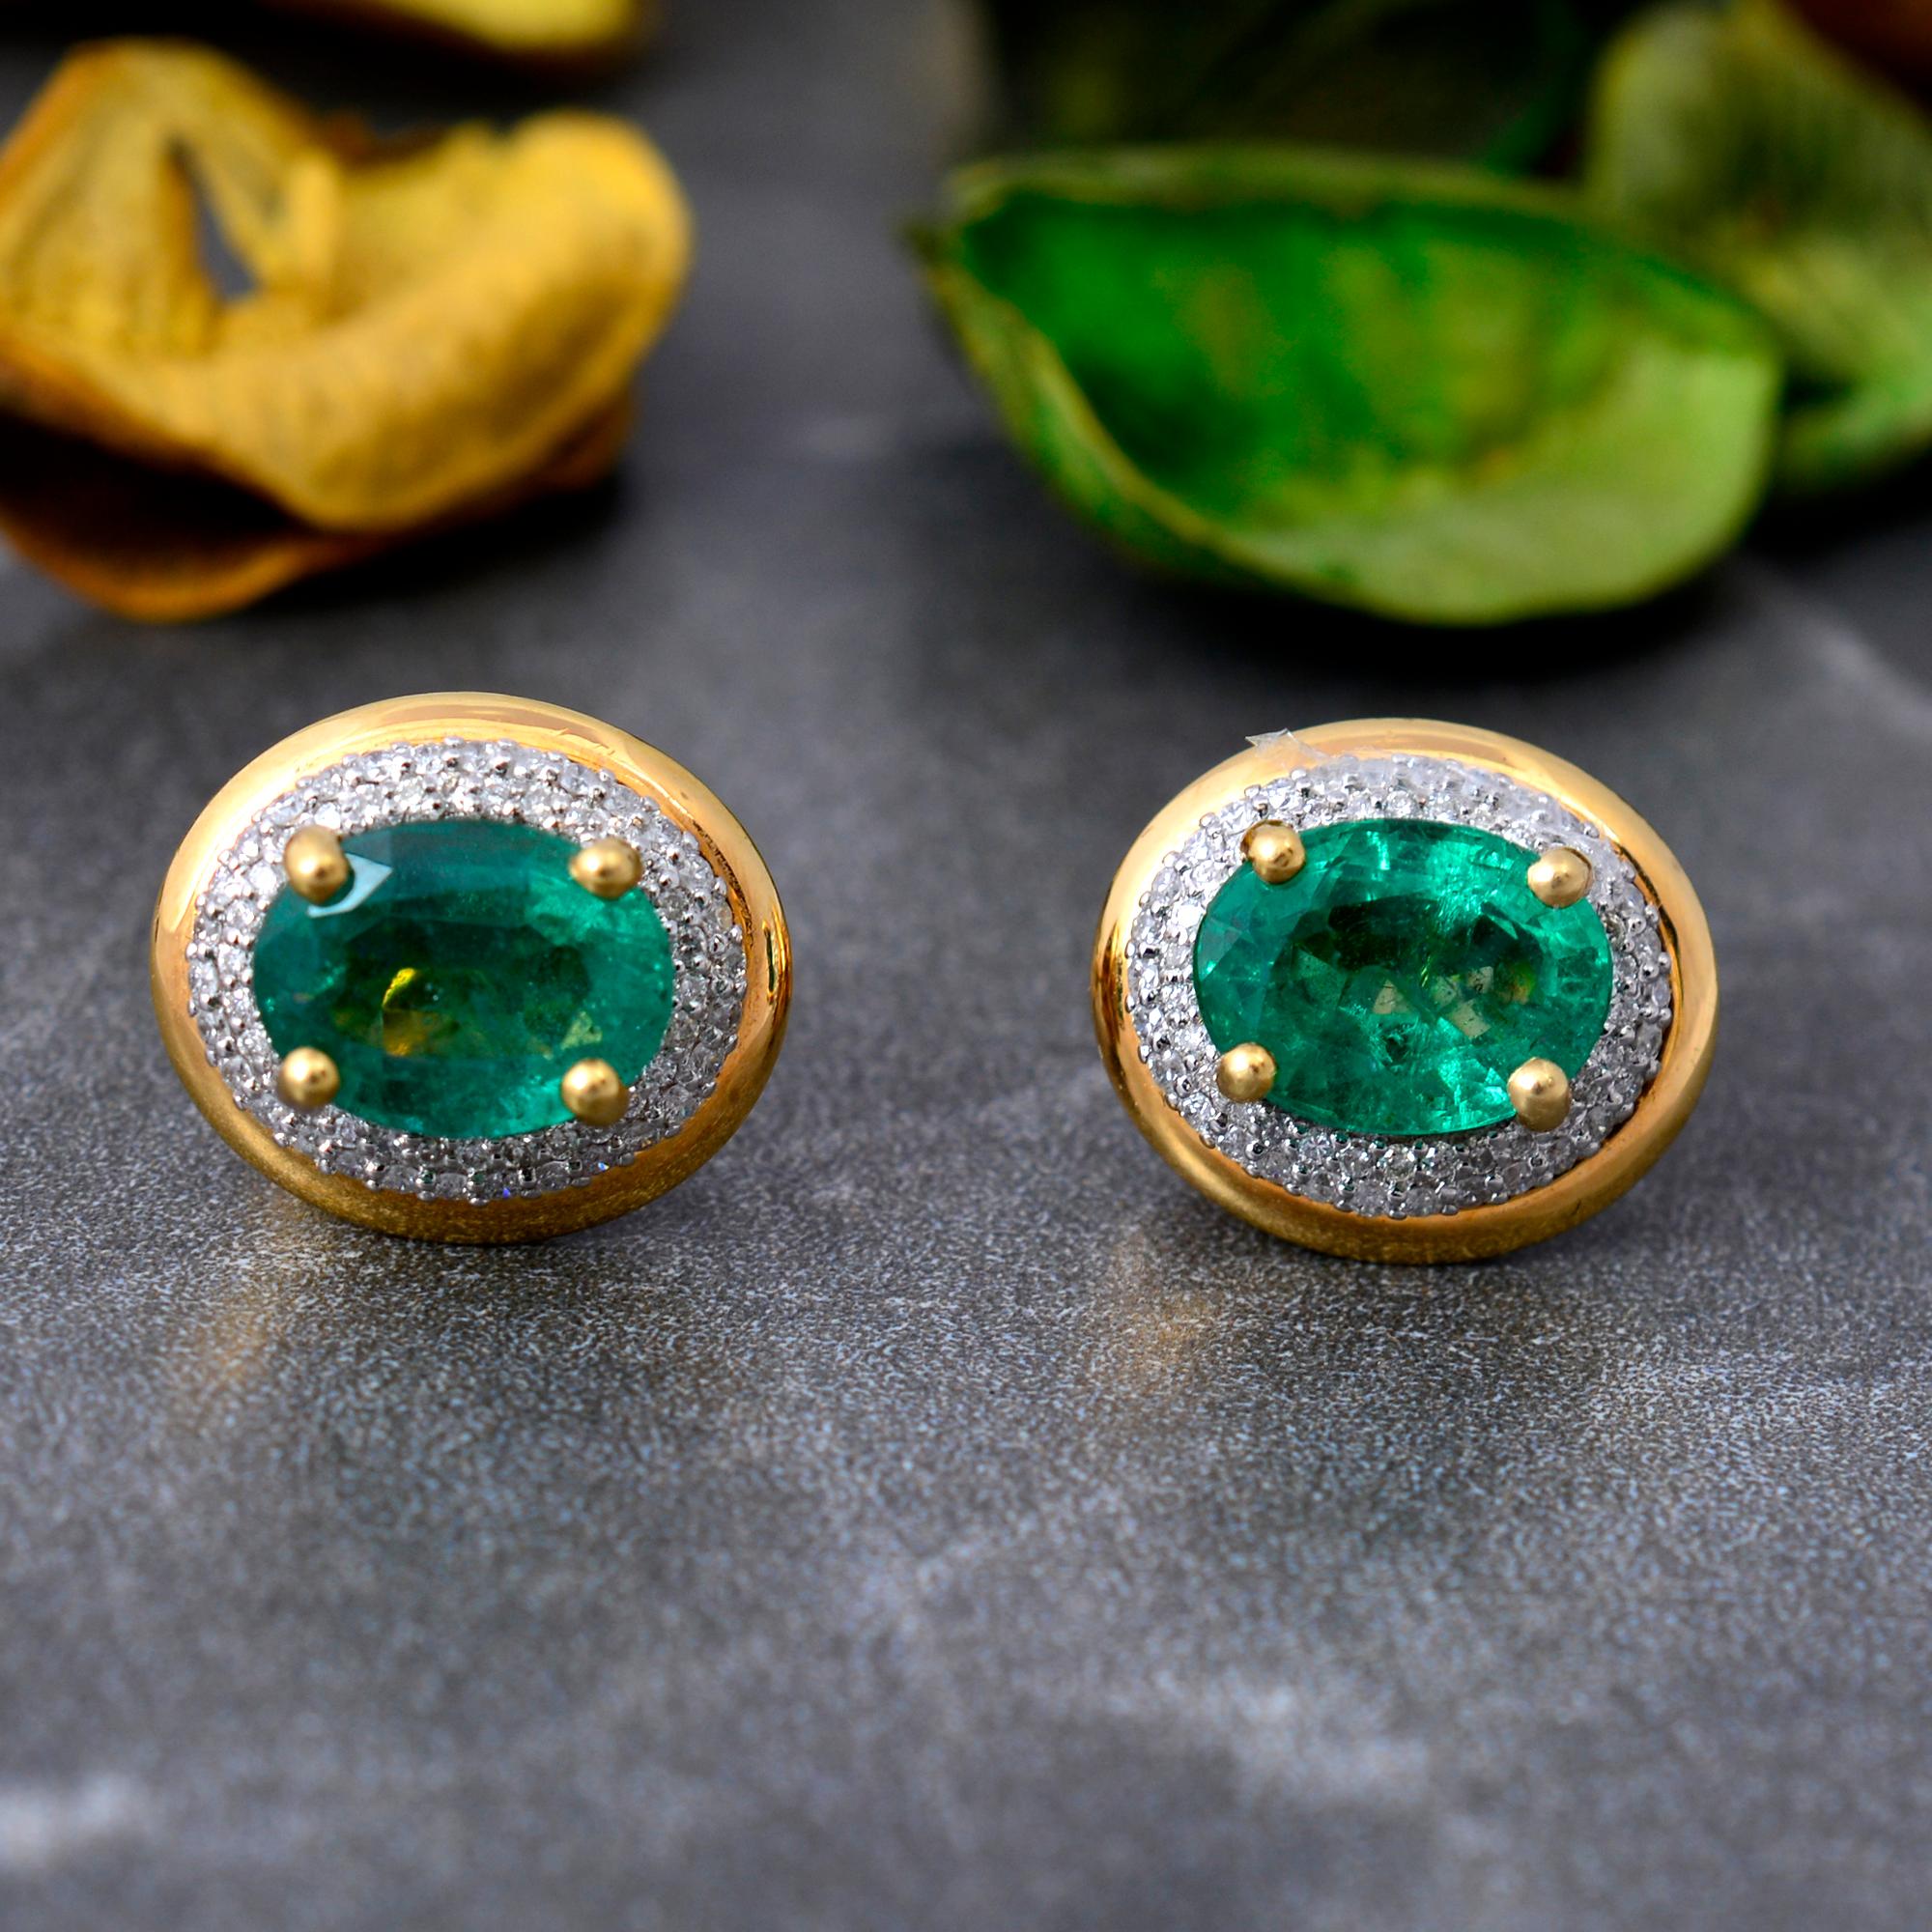 Oval Cut Oval Natural Emerald Gemstone Stud Earrings Diamond Pave 18 Karat Yellow Gold For Sale